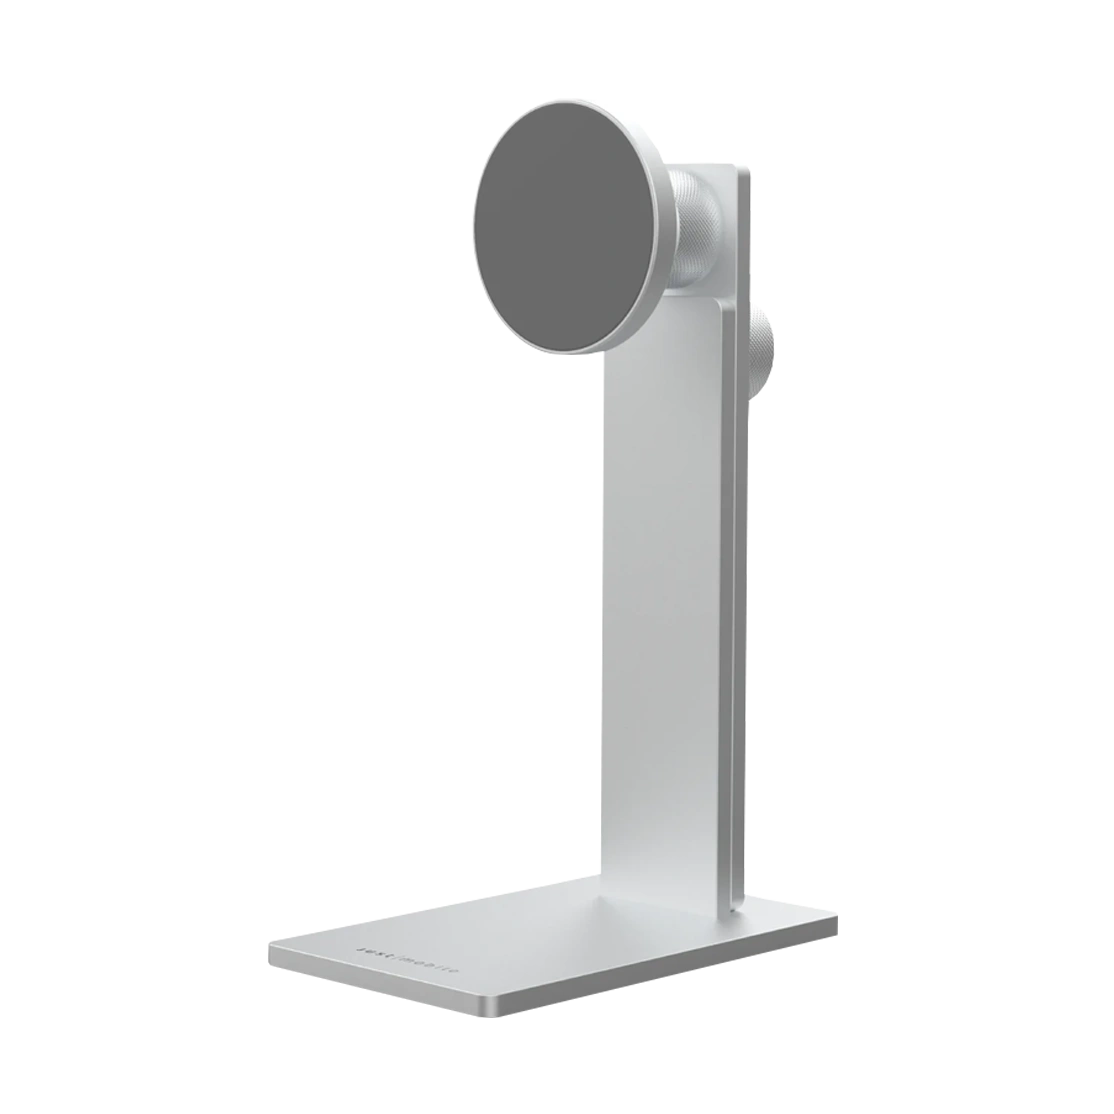 Just Mobile AluDisc Pro Smartphone Stand